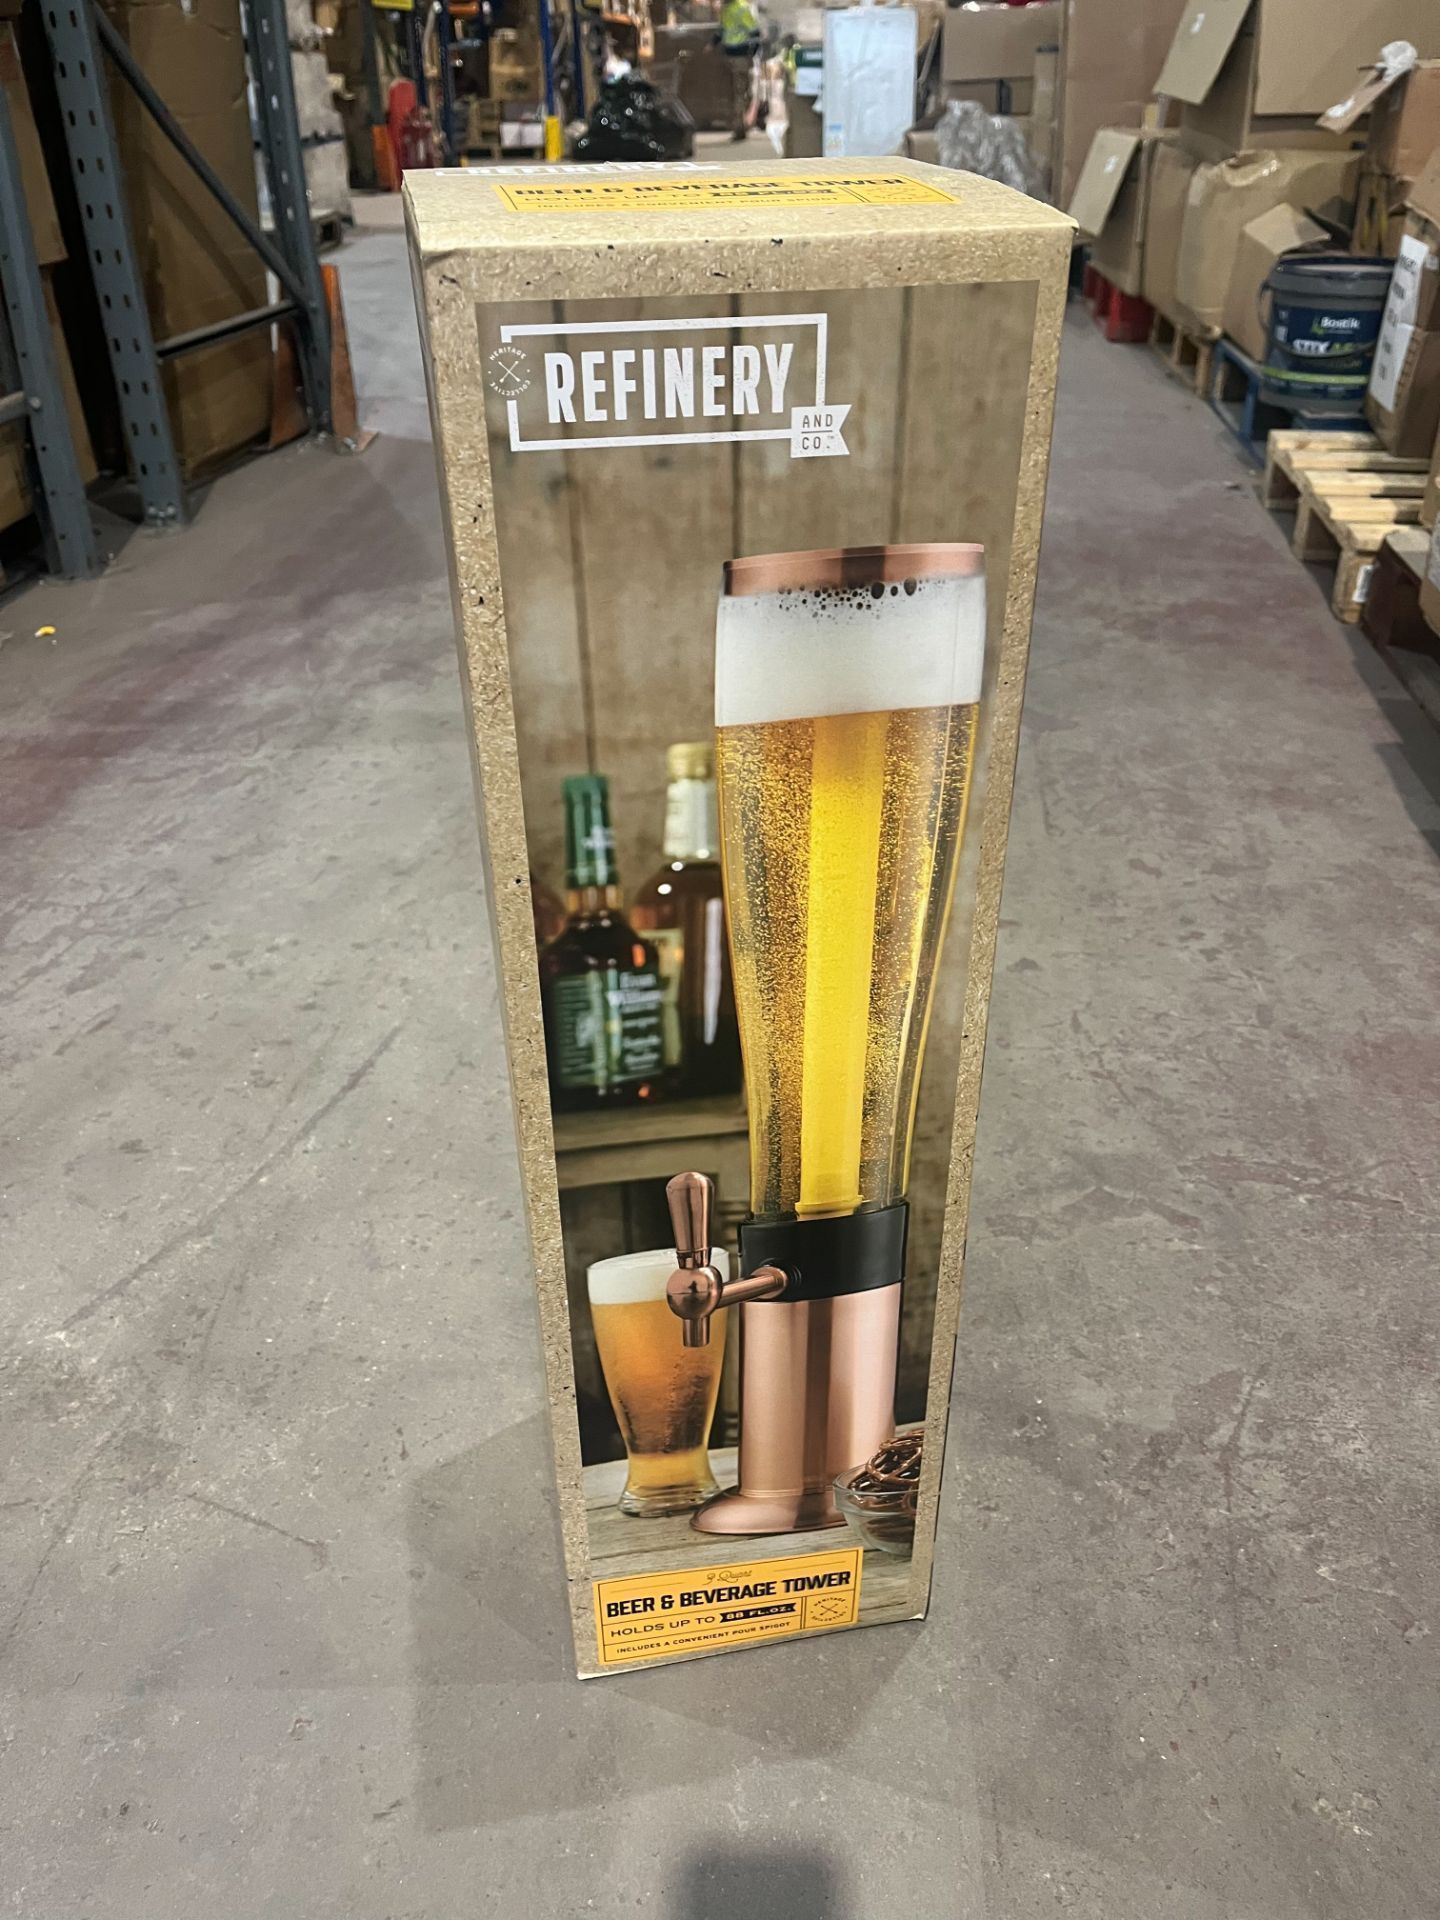 2 X Brand New & Boxed Luxury Beer & Beverage Tower. RRP £75 each. This Beer and Beverage Tower - Image 3 of 3